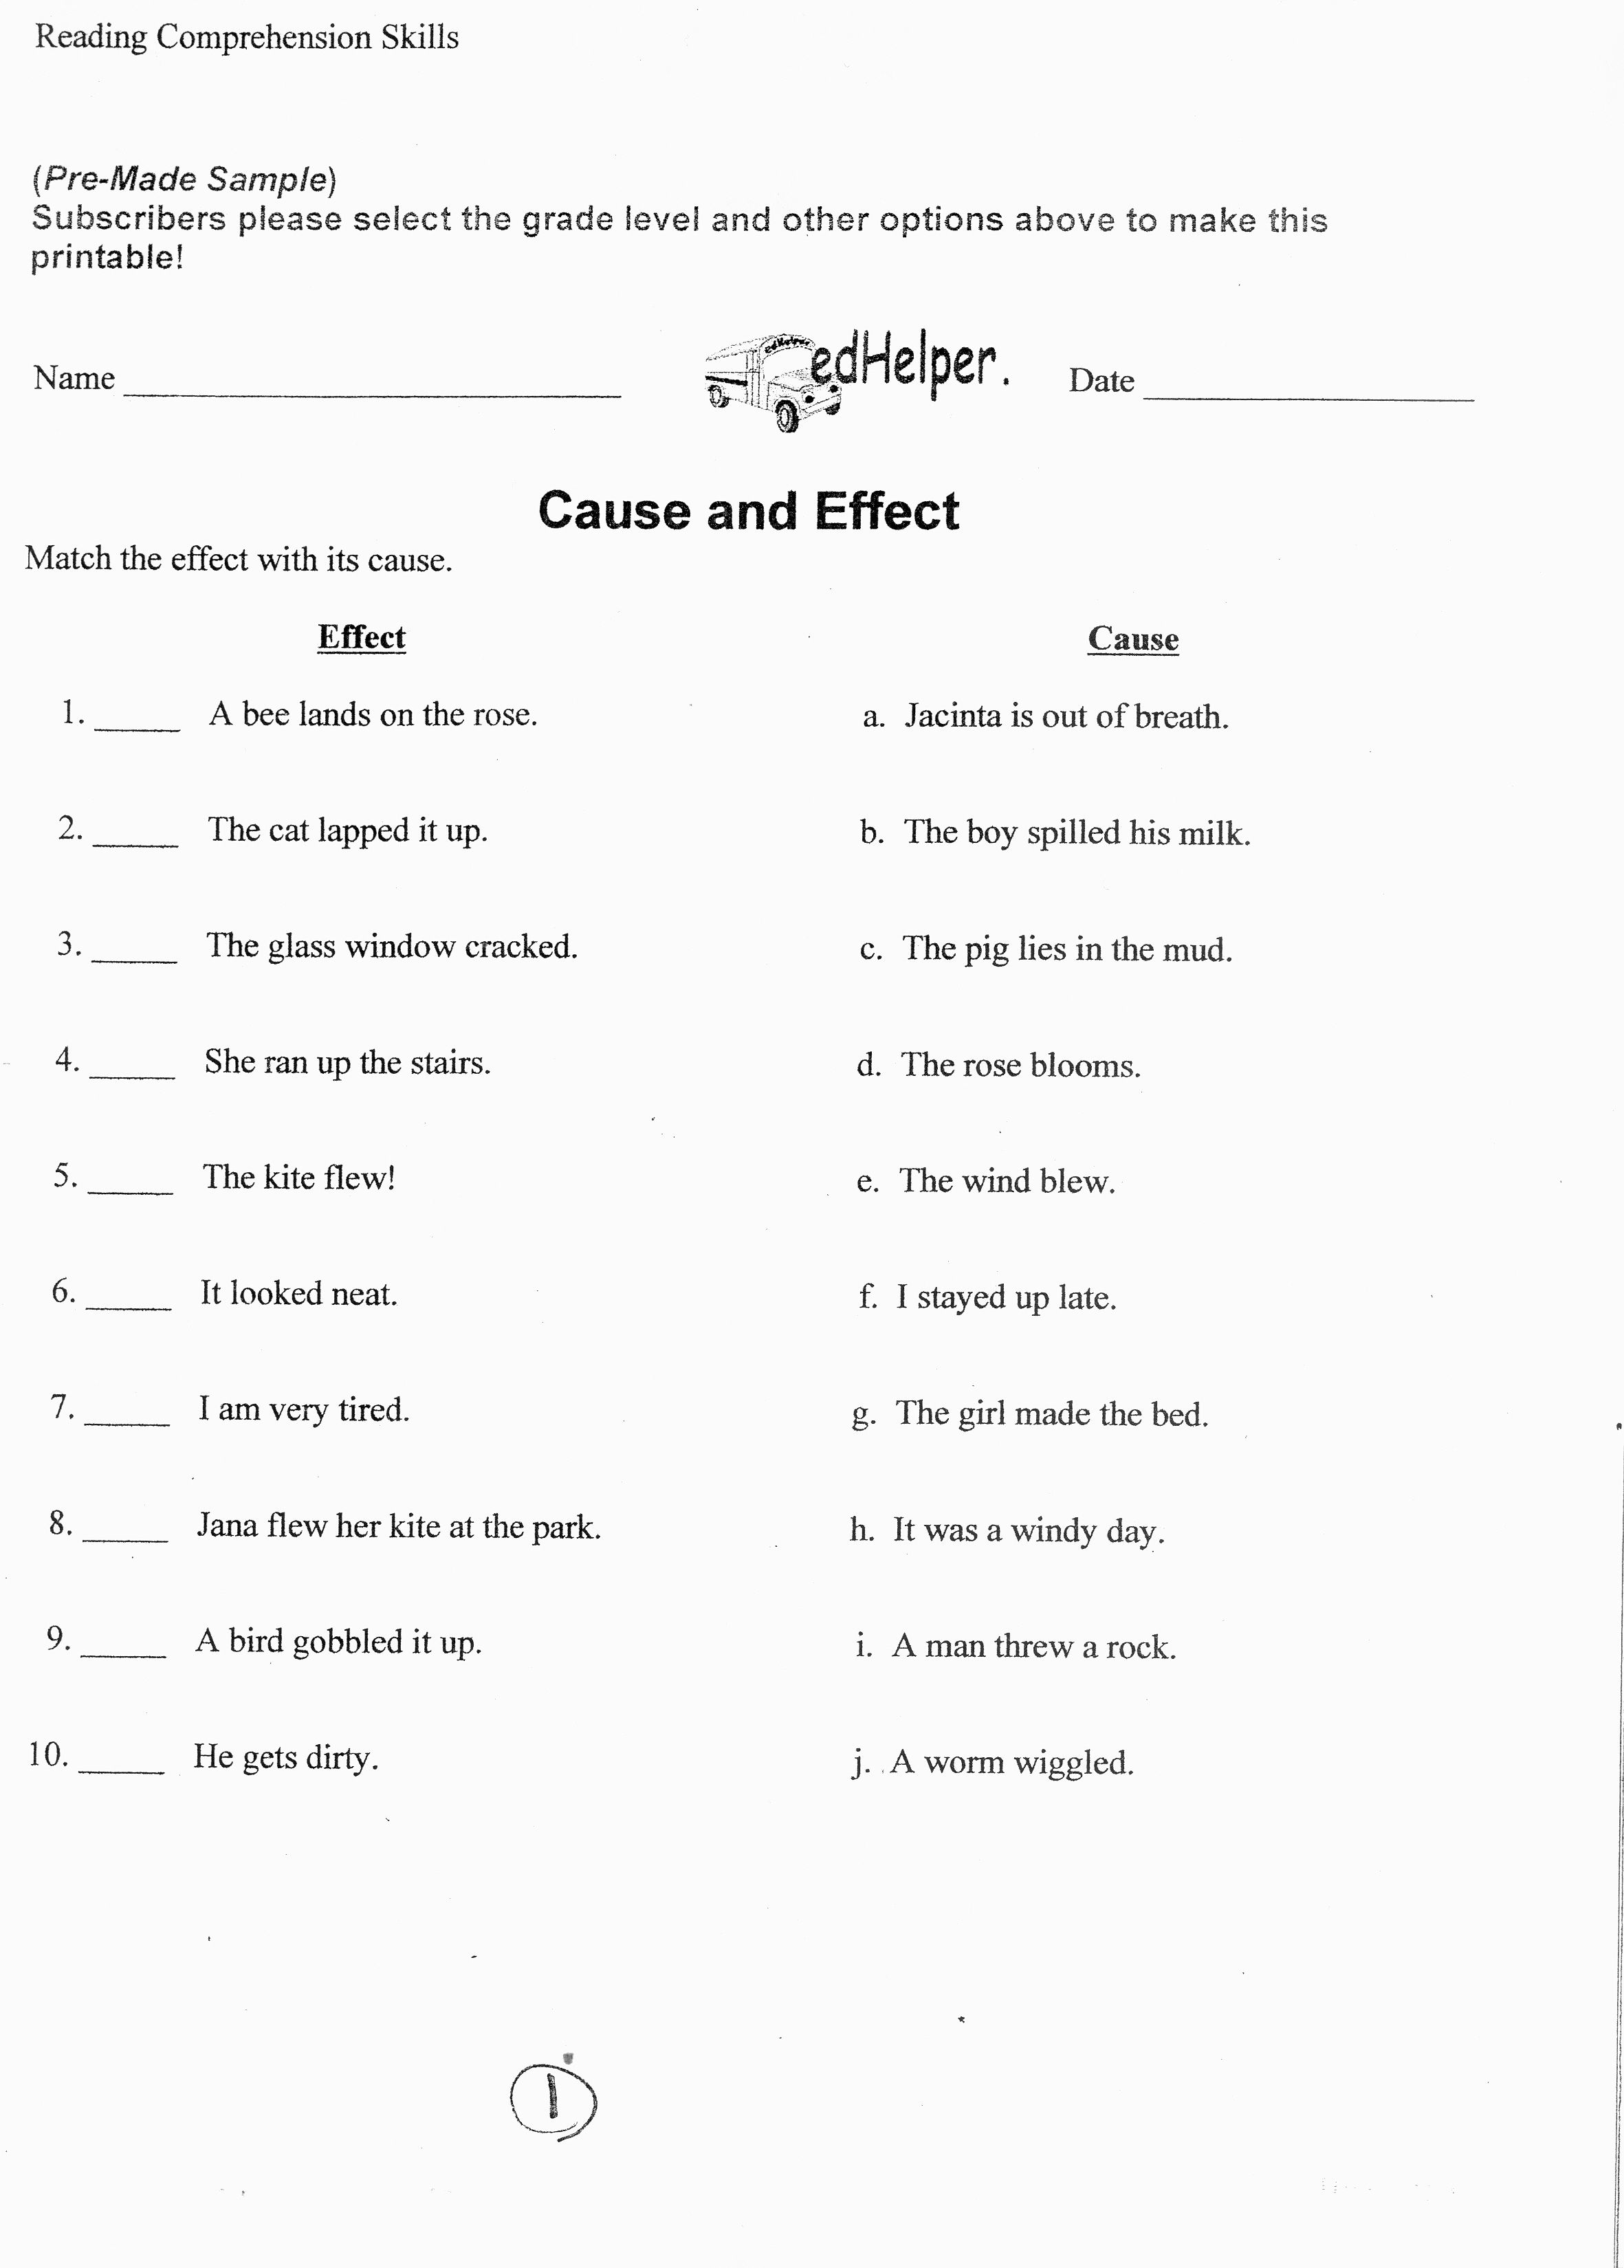 identifying-cause-and-effect-worksheets-99worksheets